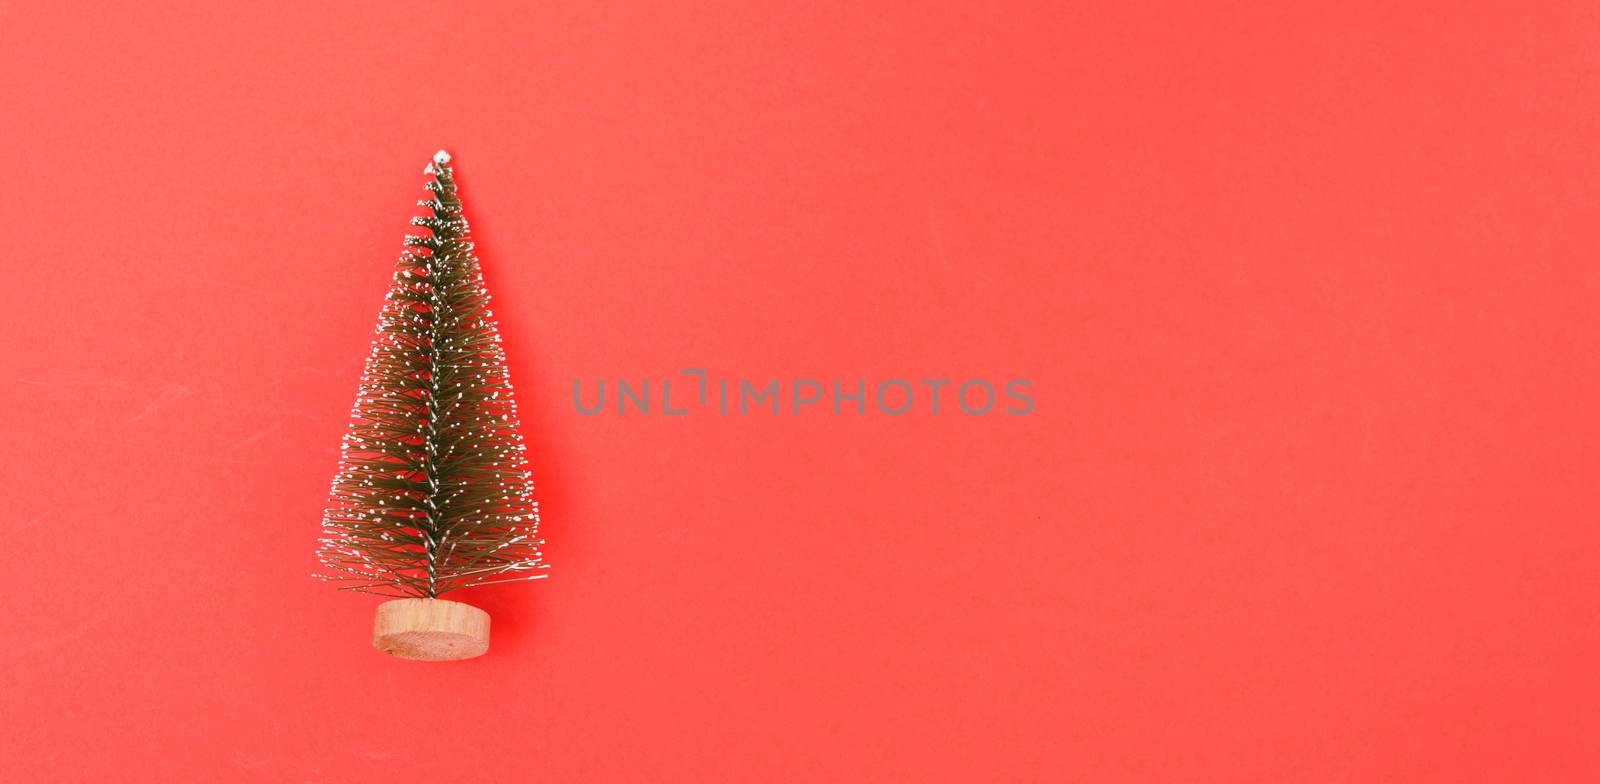 Christmas holiday theme with small Christmas trees decorated on  by Sorapop